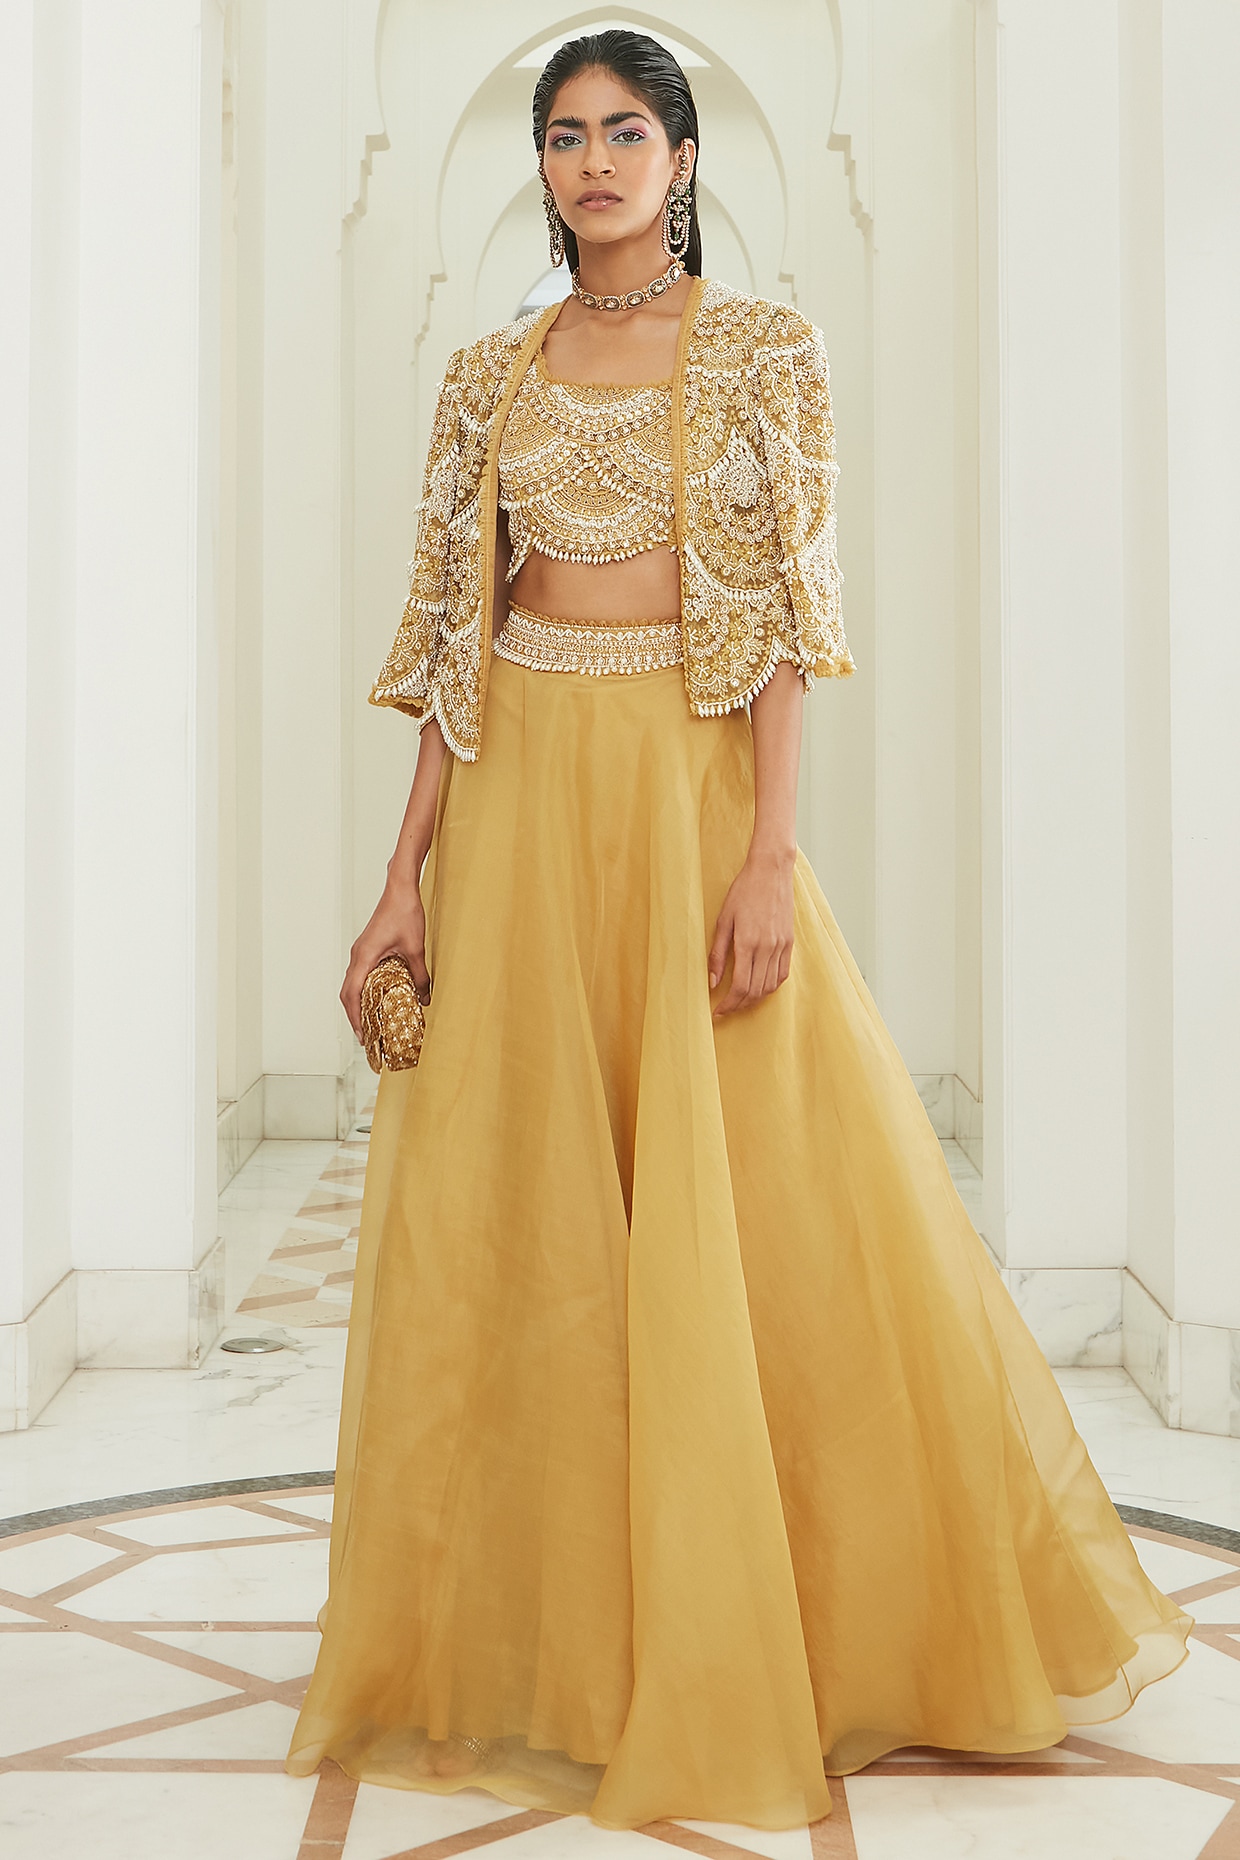 Latest 50 Crop Top and Lehenga Designs (2022) - Tips and Beauty | Lehenga  designs, Lehenga designs latest, Lehenga crop top